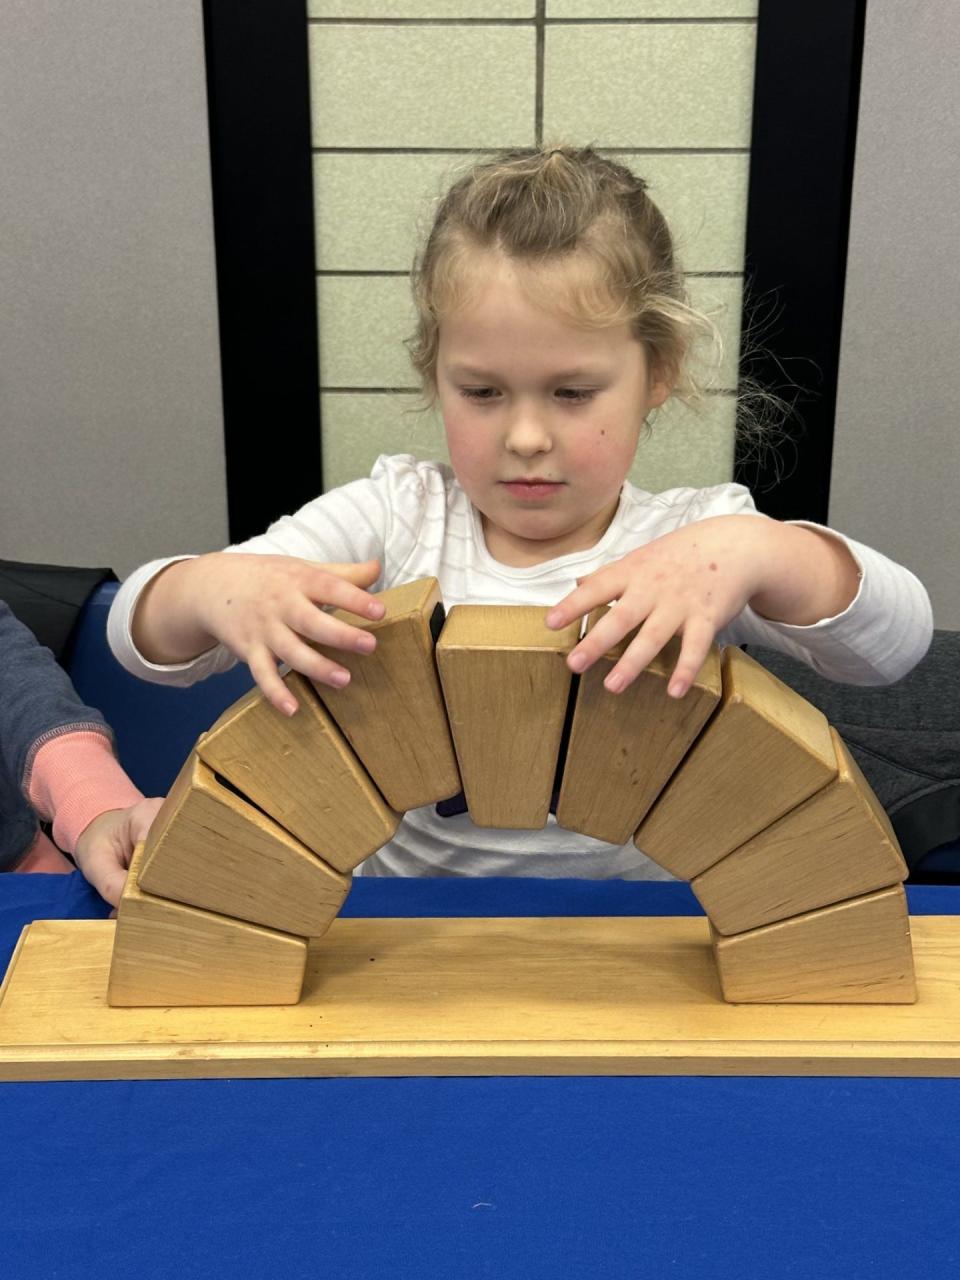 Eyler Elementary School student Adelynn Harmon builds a structure during a recent Imagination Station event at the school.